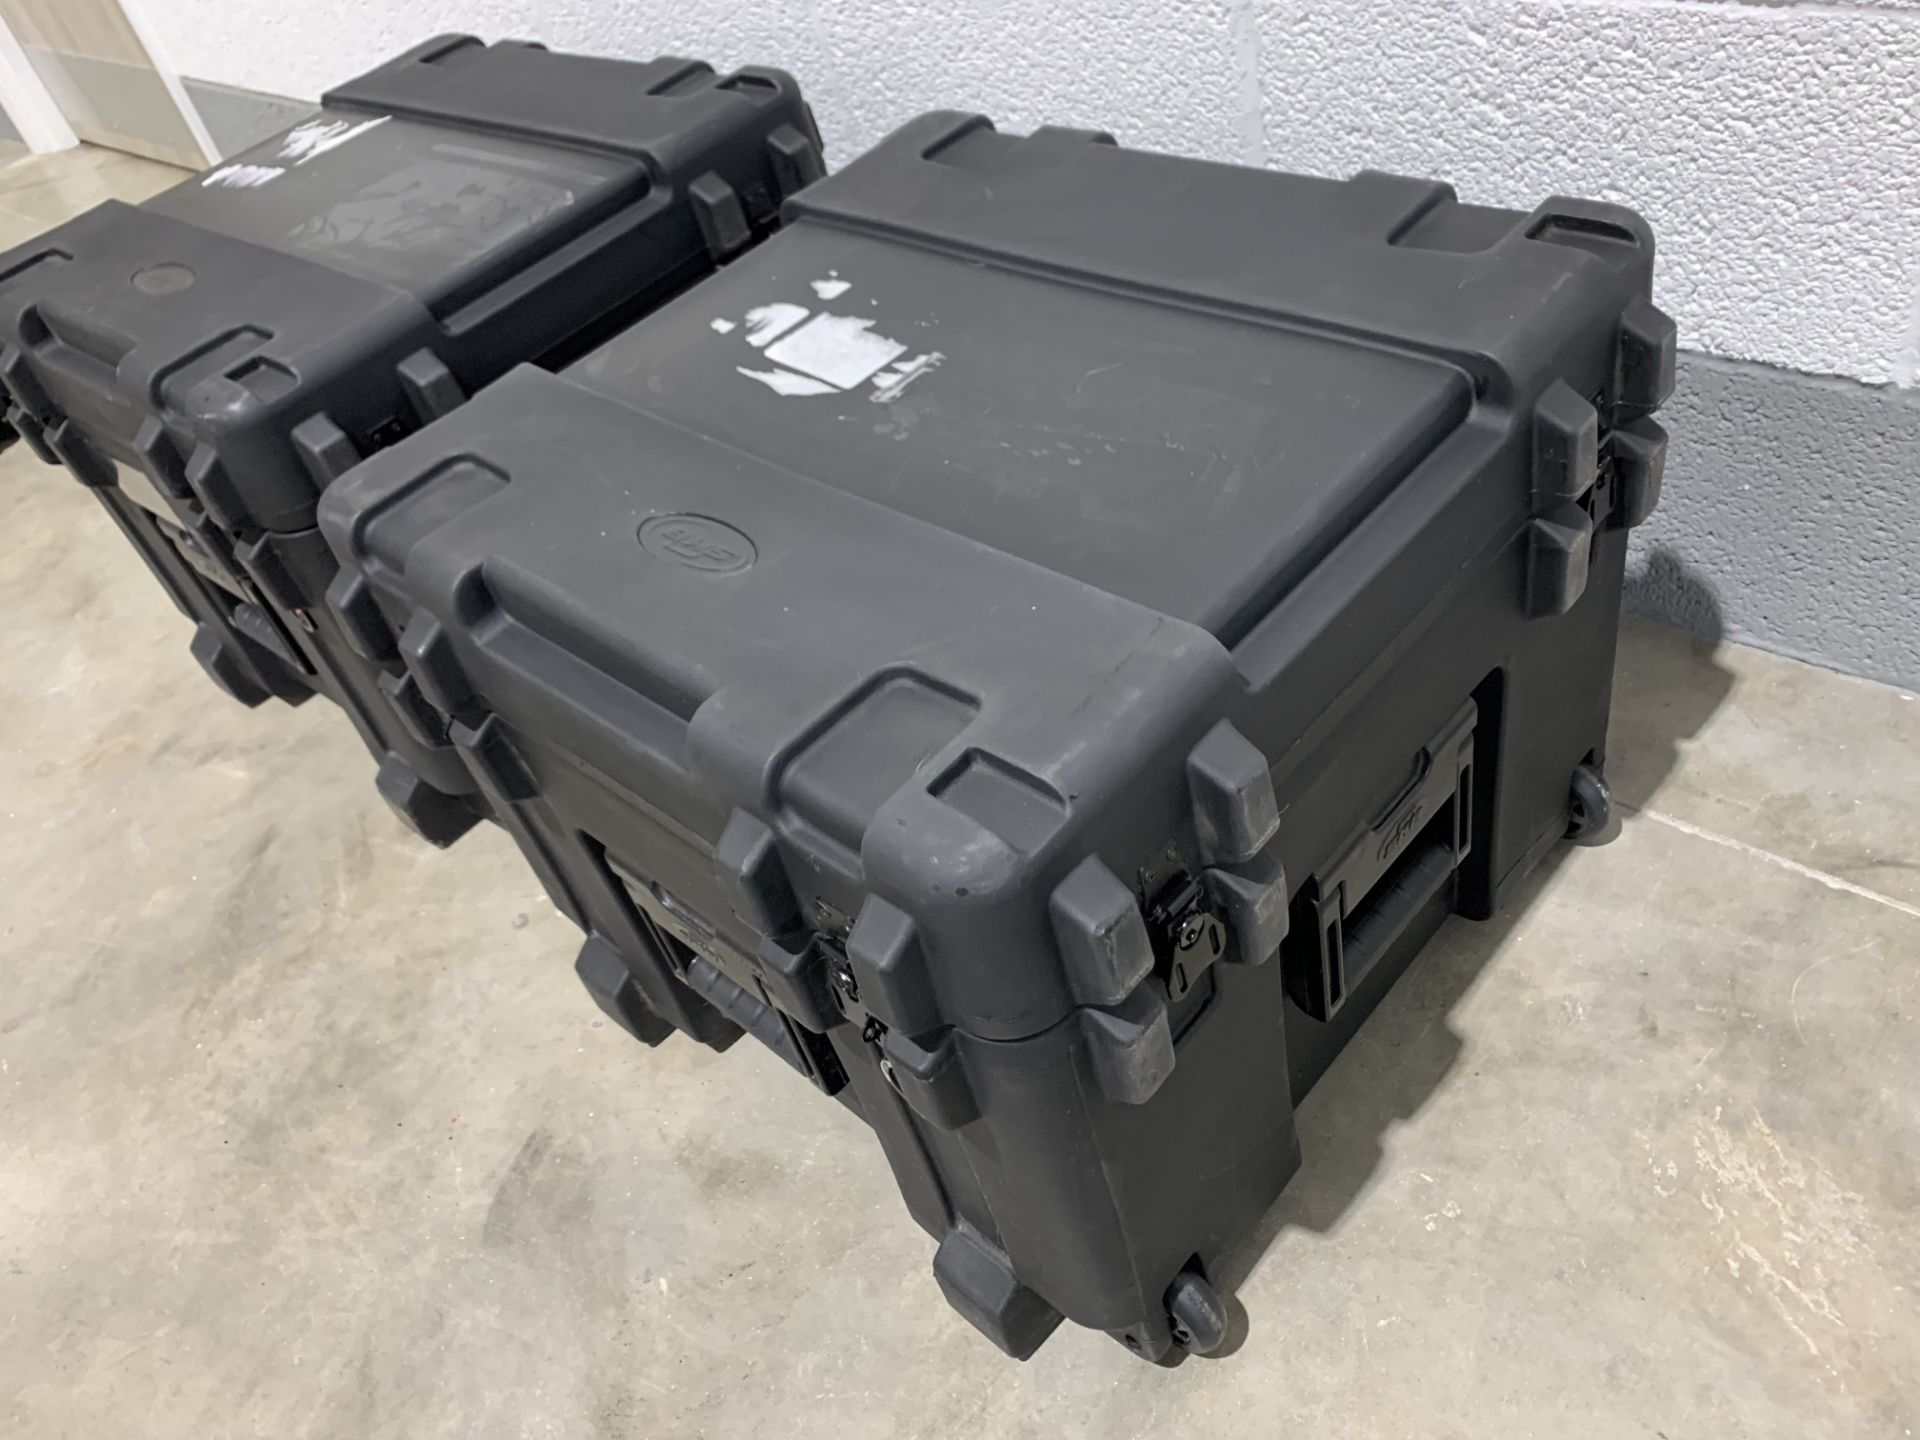 2x SKB R Series 1919-14 Waterproof Utility Case Roto Moulded Condition: Ex-Hire Solid cases. With - Image 3 of 4